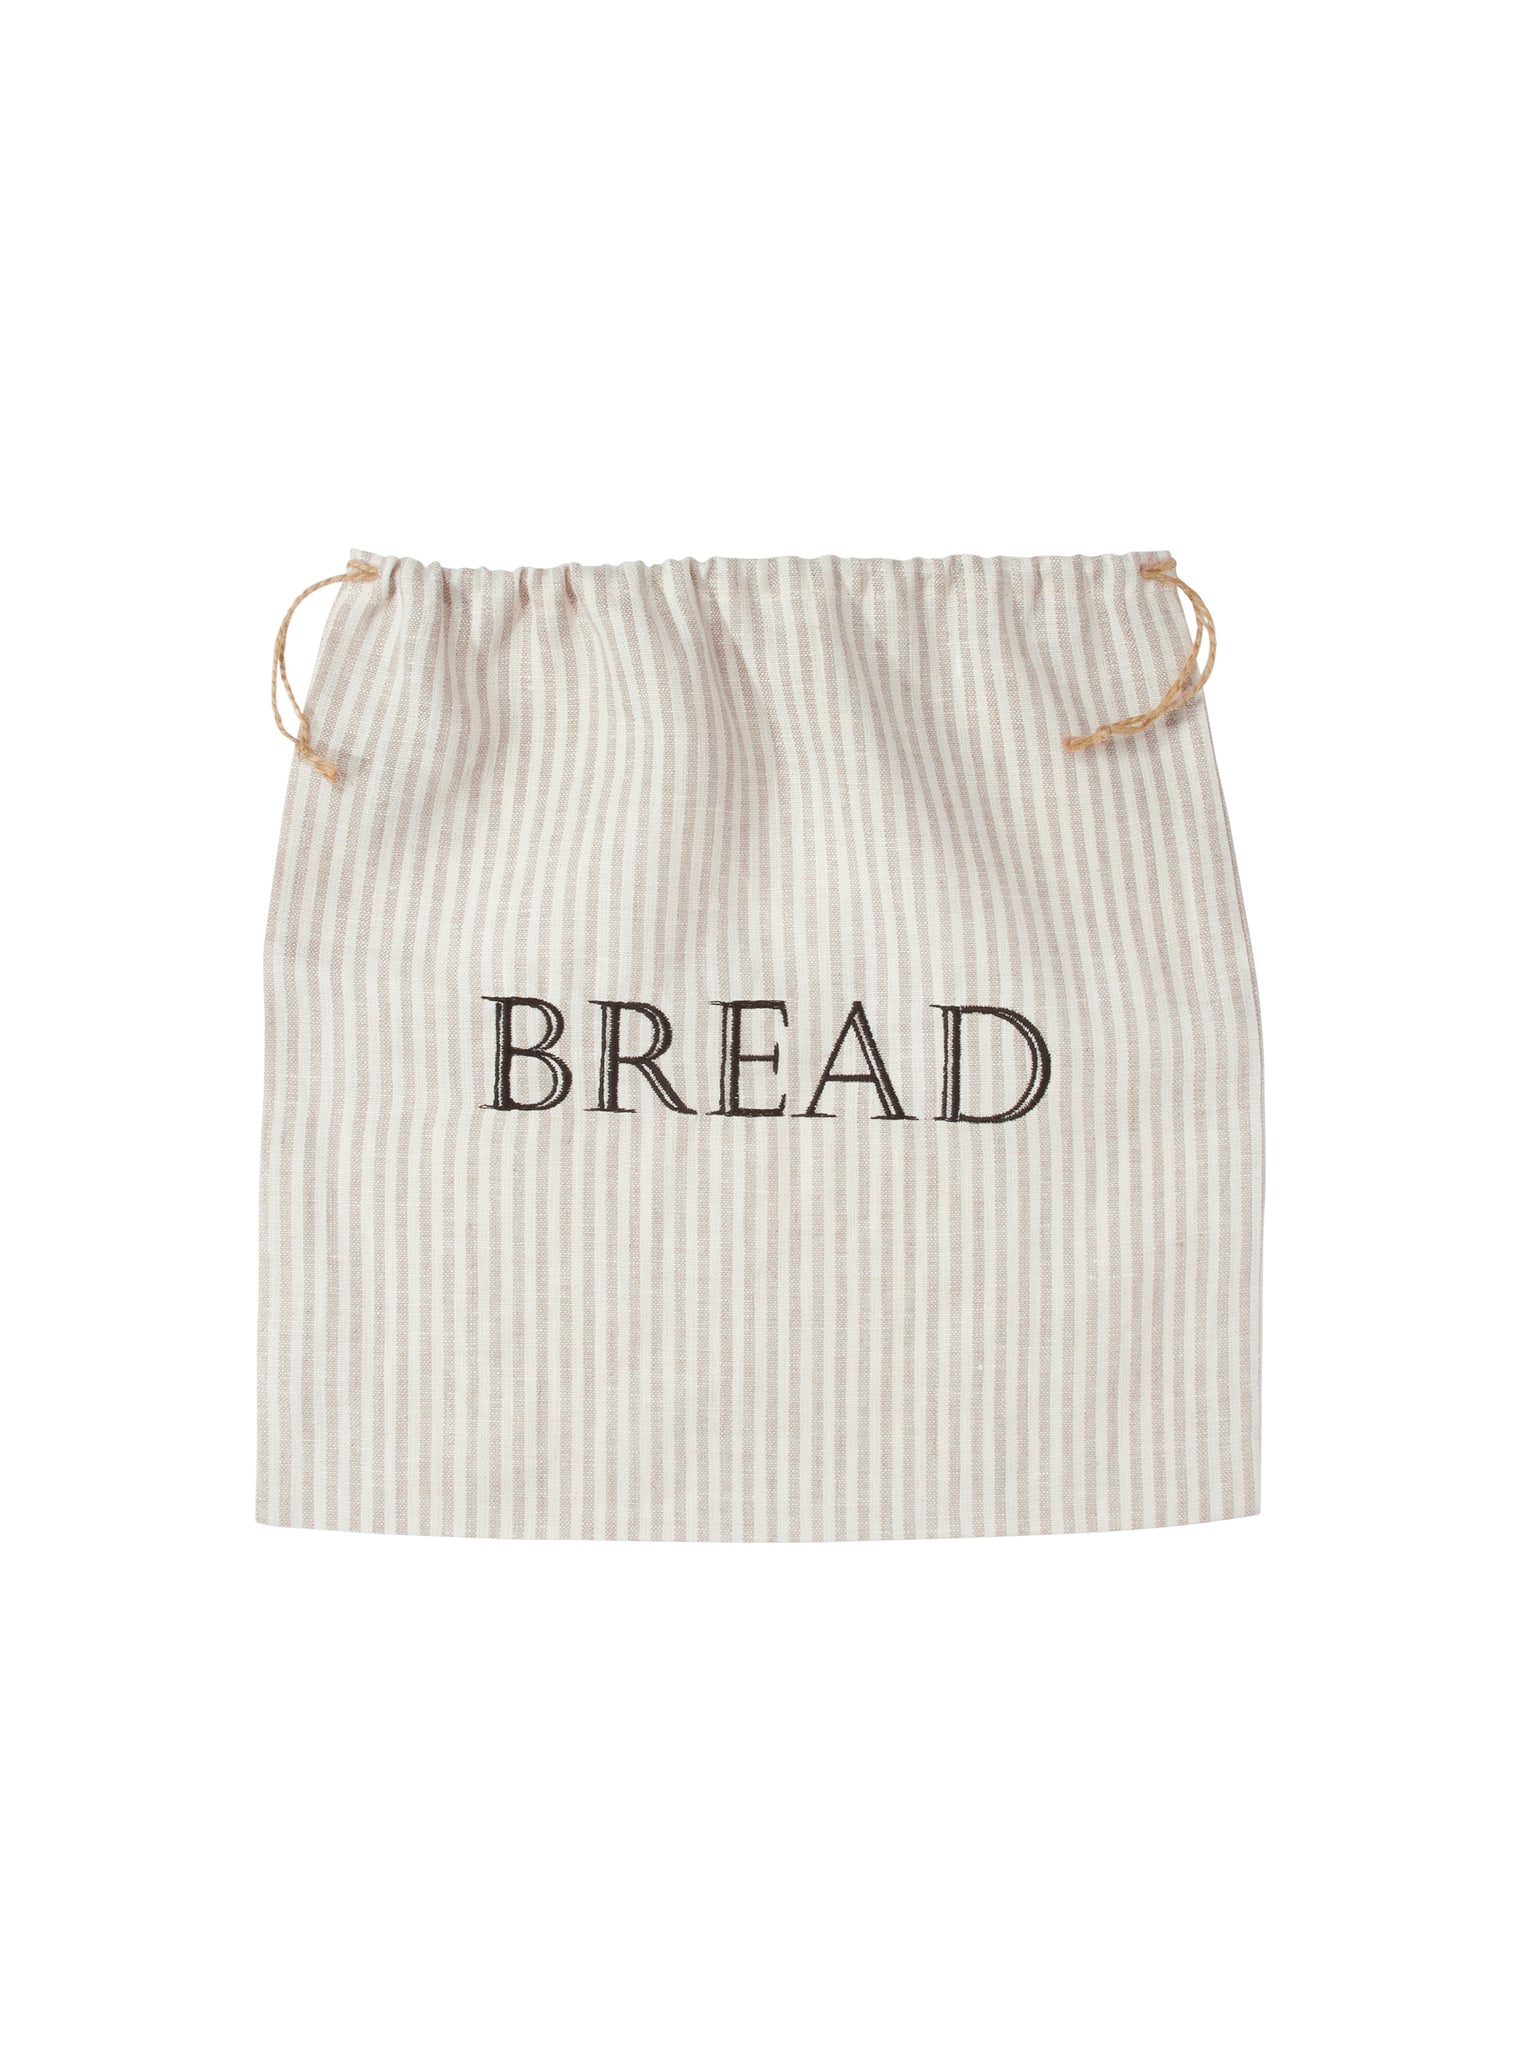 Linen Flax and Grey Stripe Bread Bag Weston Table